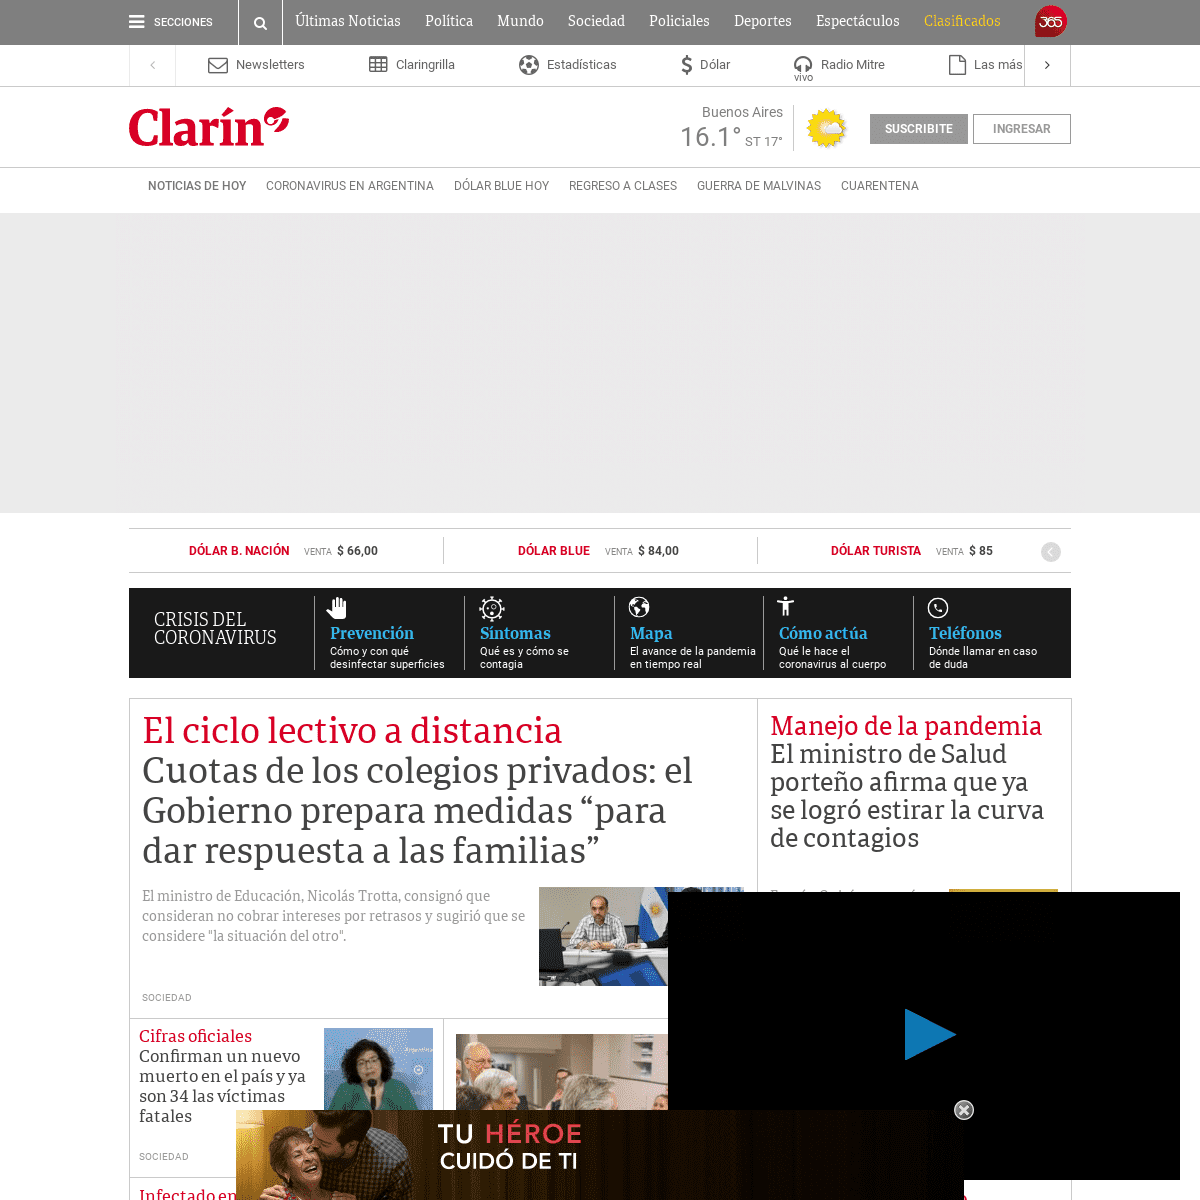 A complete backup of clarin.com